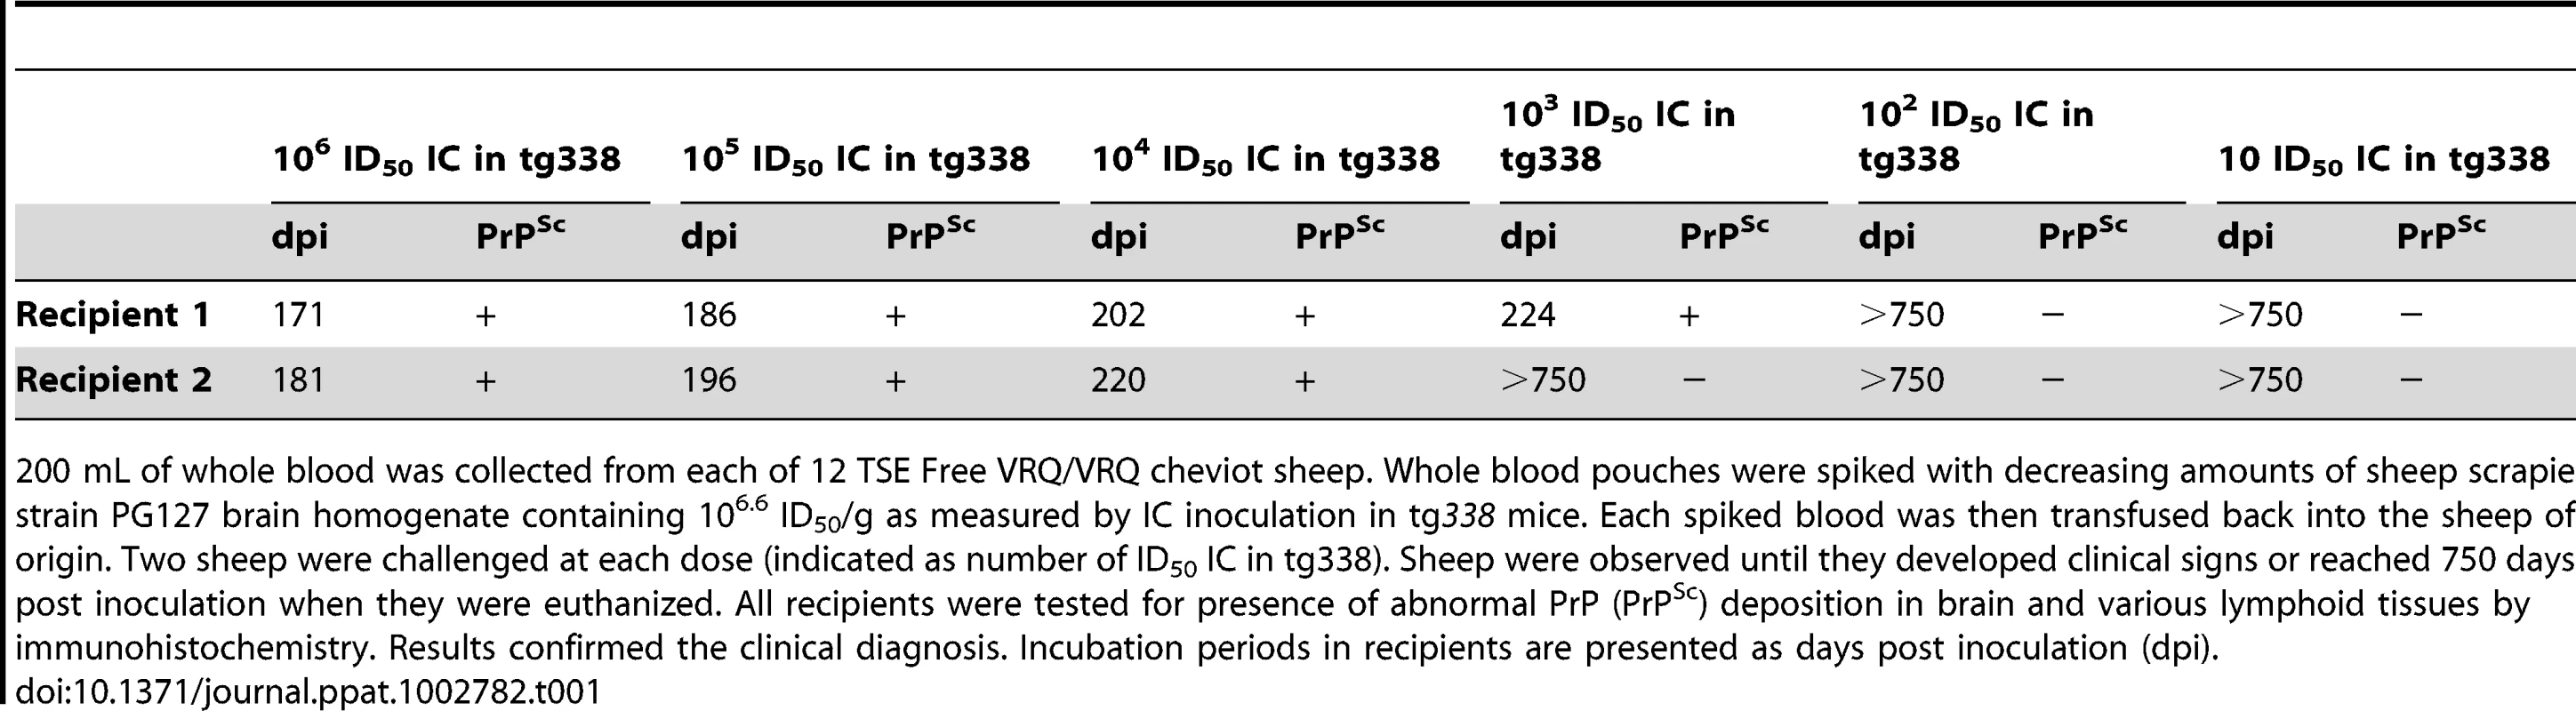 Transfusion of VRQ/VRQ sheep with blood spiked with decreasing amounts of PG127 infected sheep brain homogenate.